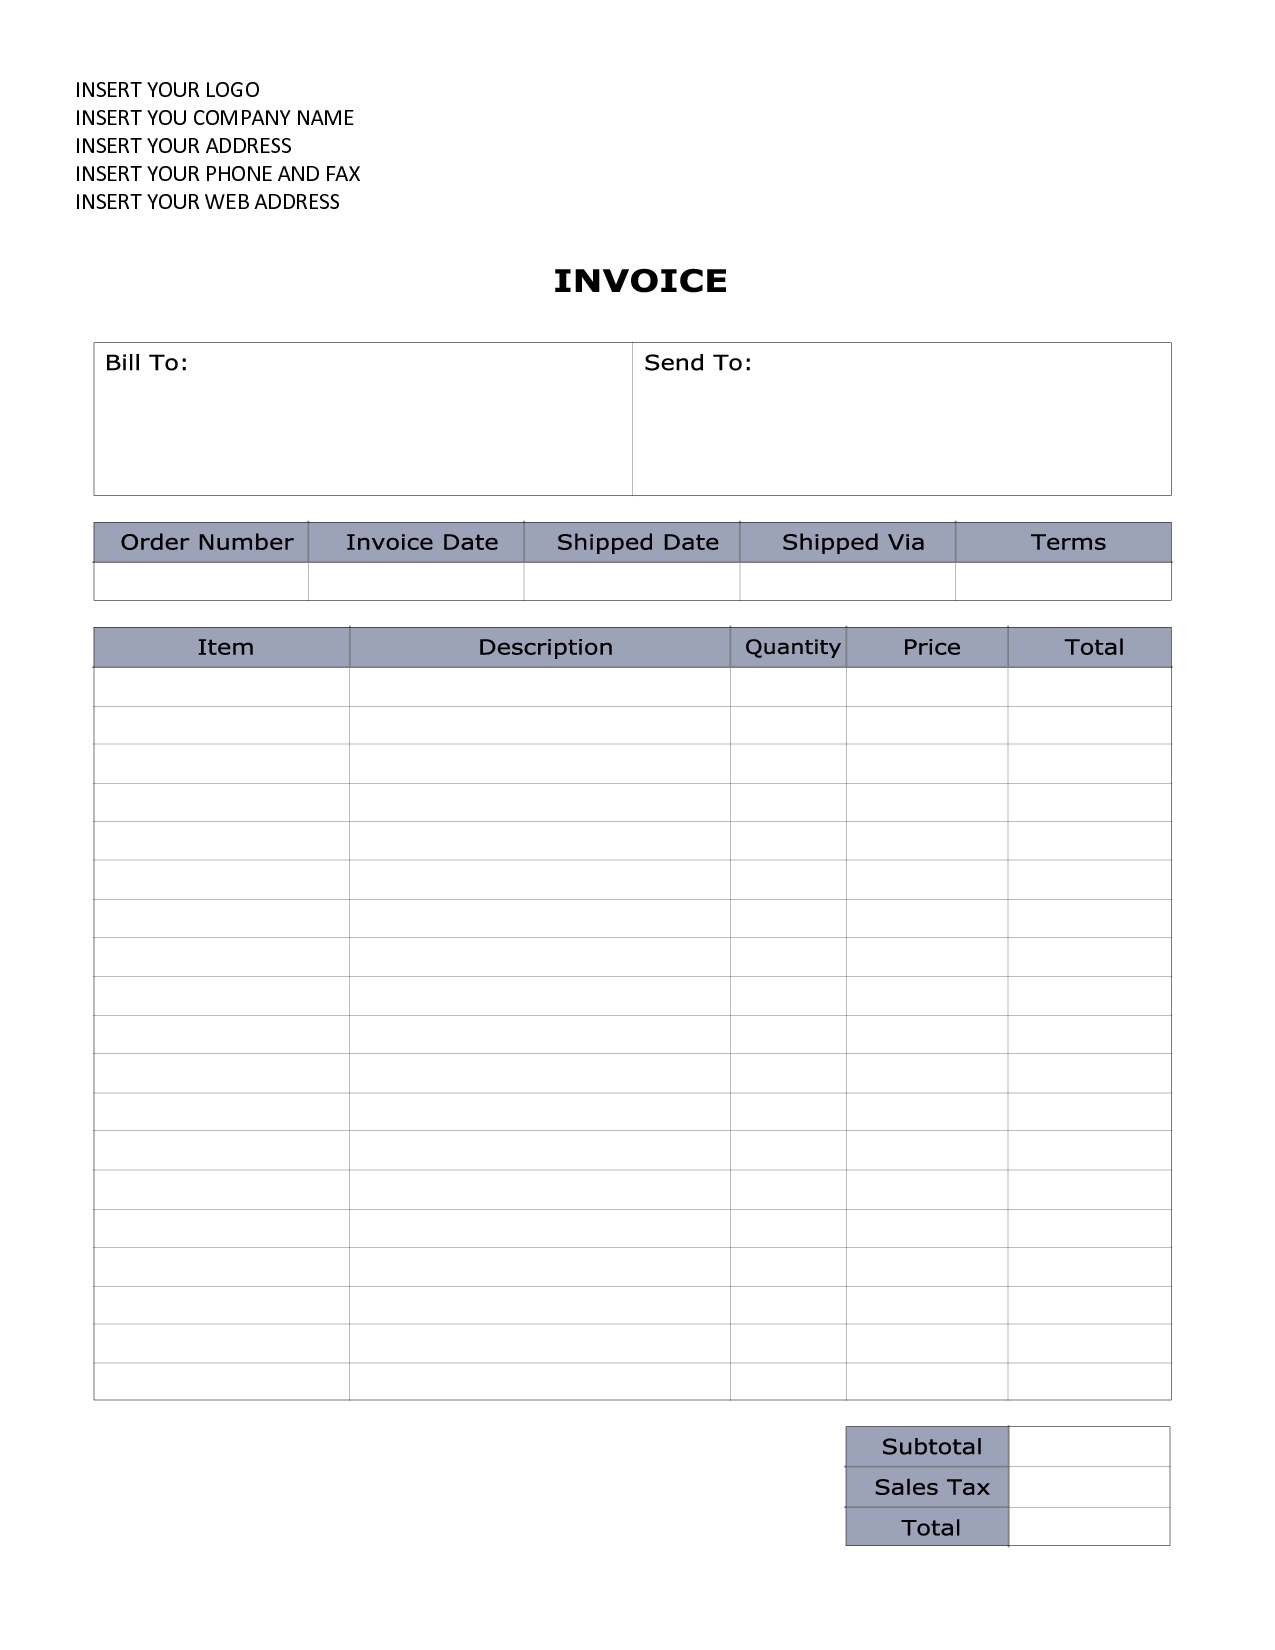 invoice template word 10 examples and the information in sales invoice sample word 1275 X 1650